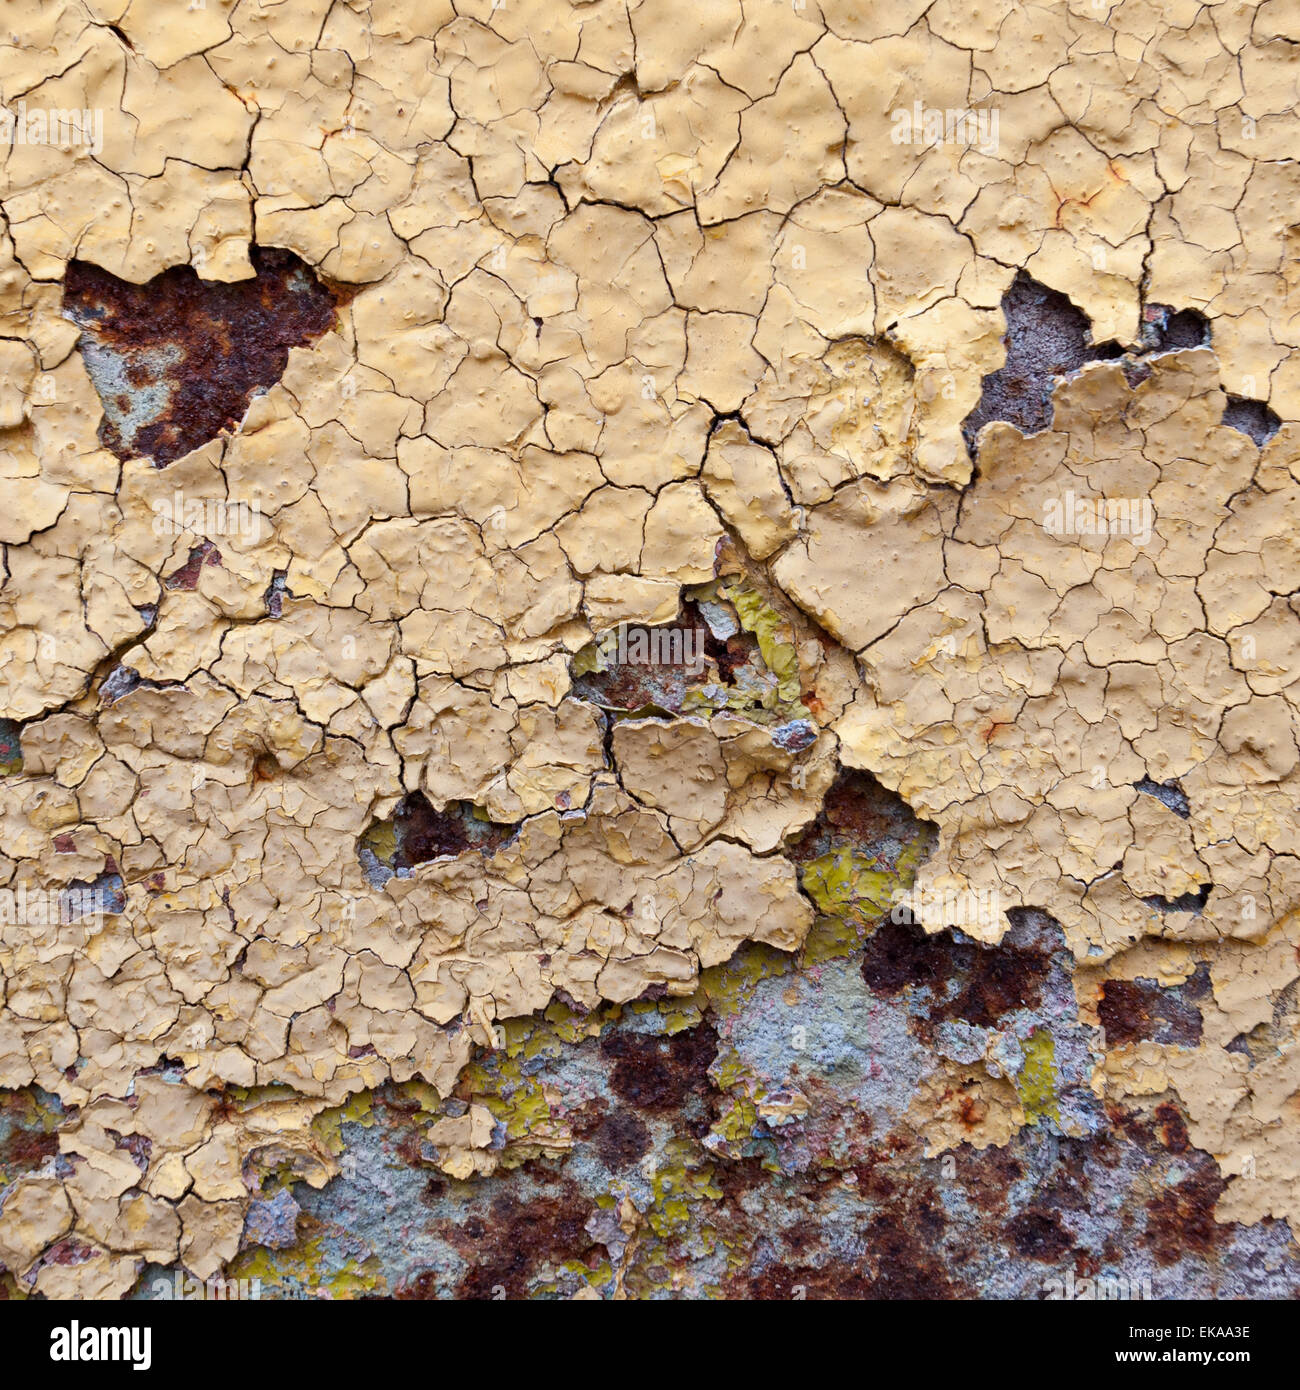 abstract corroded colorful wallpaper grunge background iron rusty artistic wall peeling paint. Oxidized metal surface. Abstract Stock Photo